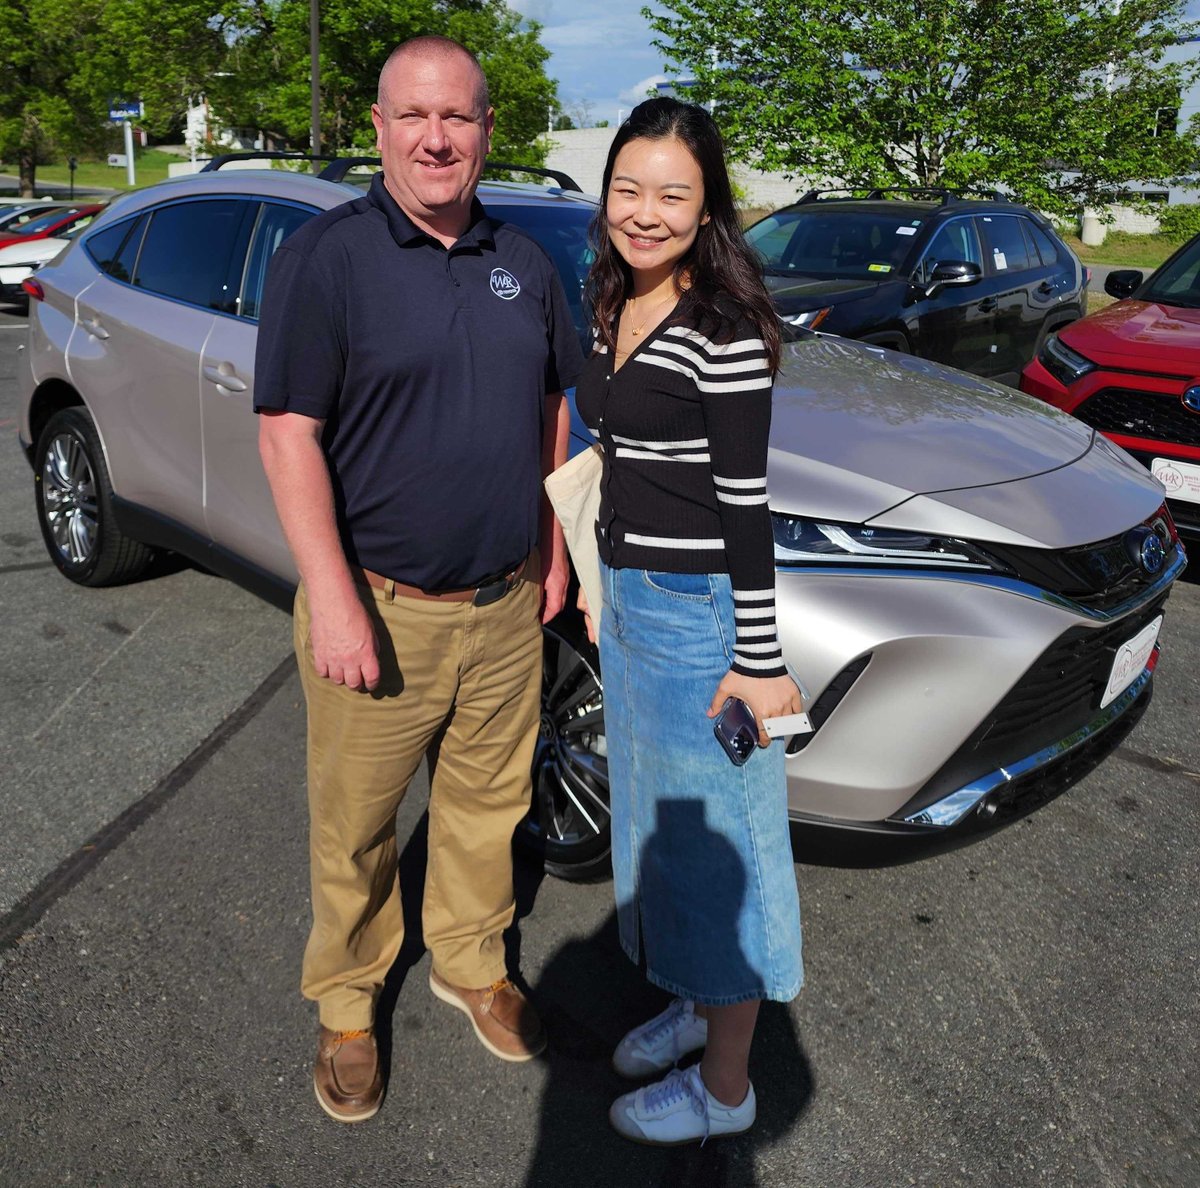 Happy #NewCarDay to Yisuan! She could hardly contain her excitement as she got ready to take home this beautiful new @Toyota Venza she picked out with Justin Smith - Congratulations!

Learn more about Justin and check out his reviews on @DealerRater here: bit.ly/3O9Zor2